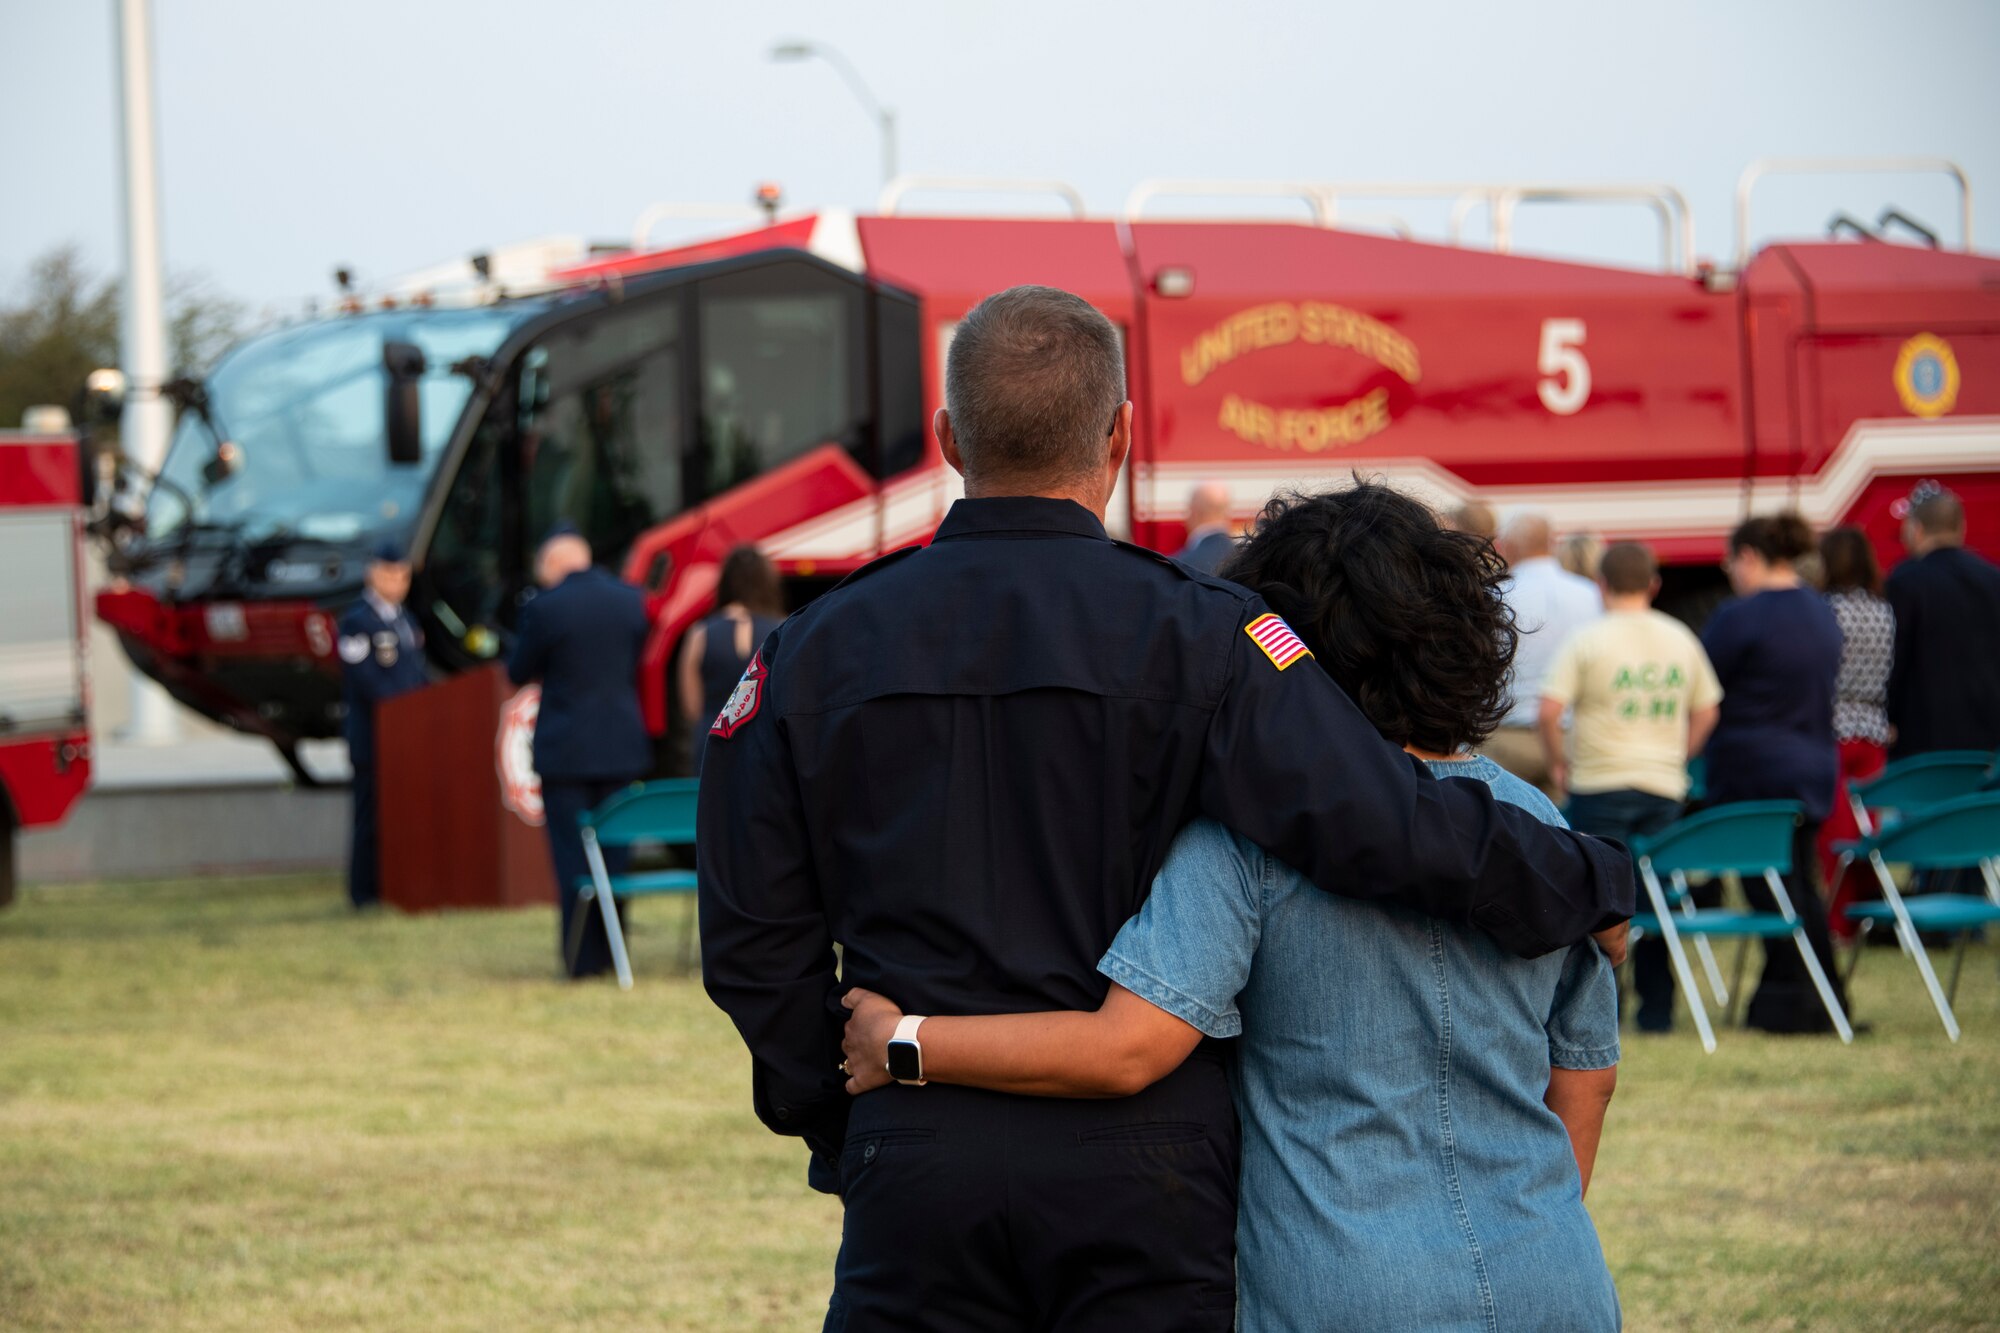 Philip Fourroux, 97th Civil Engineer Squadron installation fire chief, left, and his wife comfort each other during the 97th Air Mobility Wing Remembrance Ceremony at Altus Air Force Base, Oklahoma, Sept. 11, 2021. This is the tenth year the base has held a 9/11 memorial ceremony as a wing-level event for all Airmen. (U.S. Air Force photo by Senior Airman Amanda Lovelace)